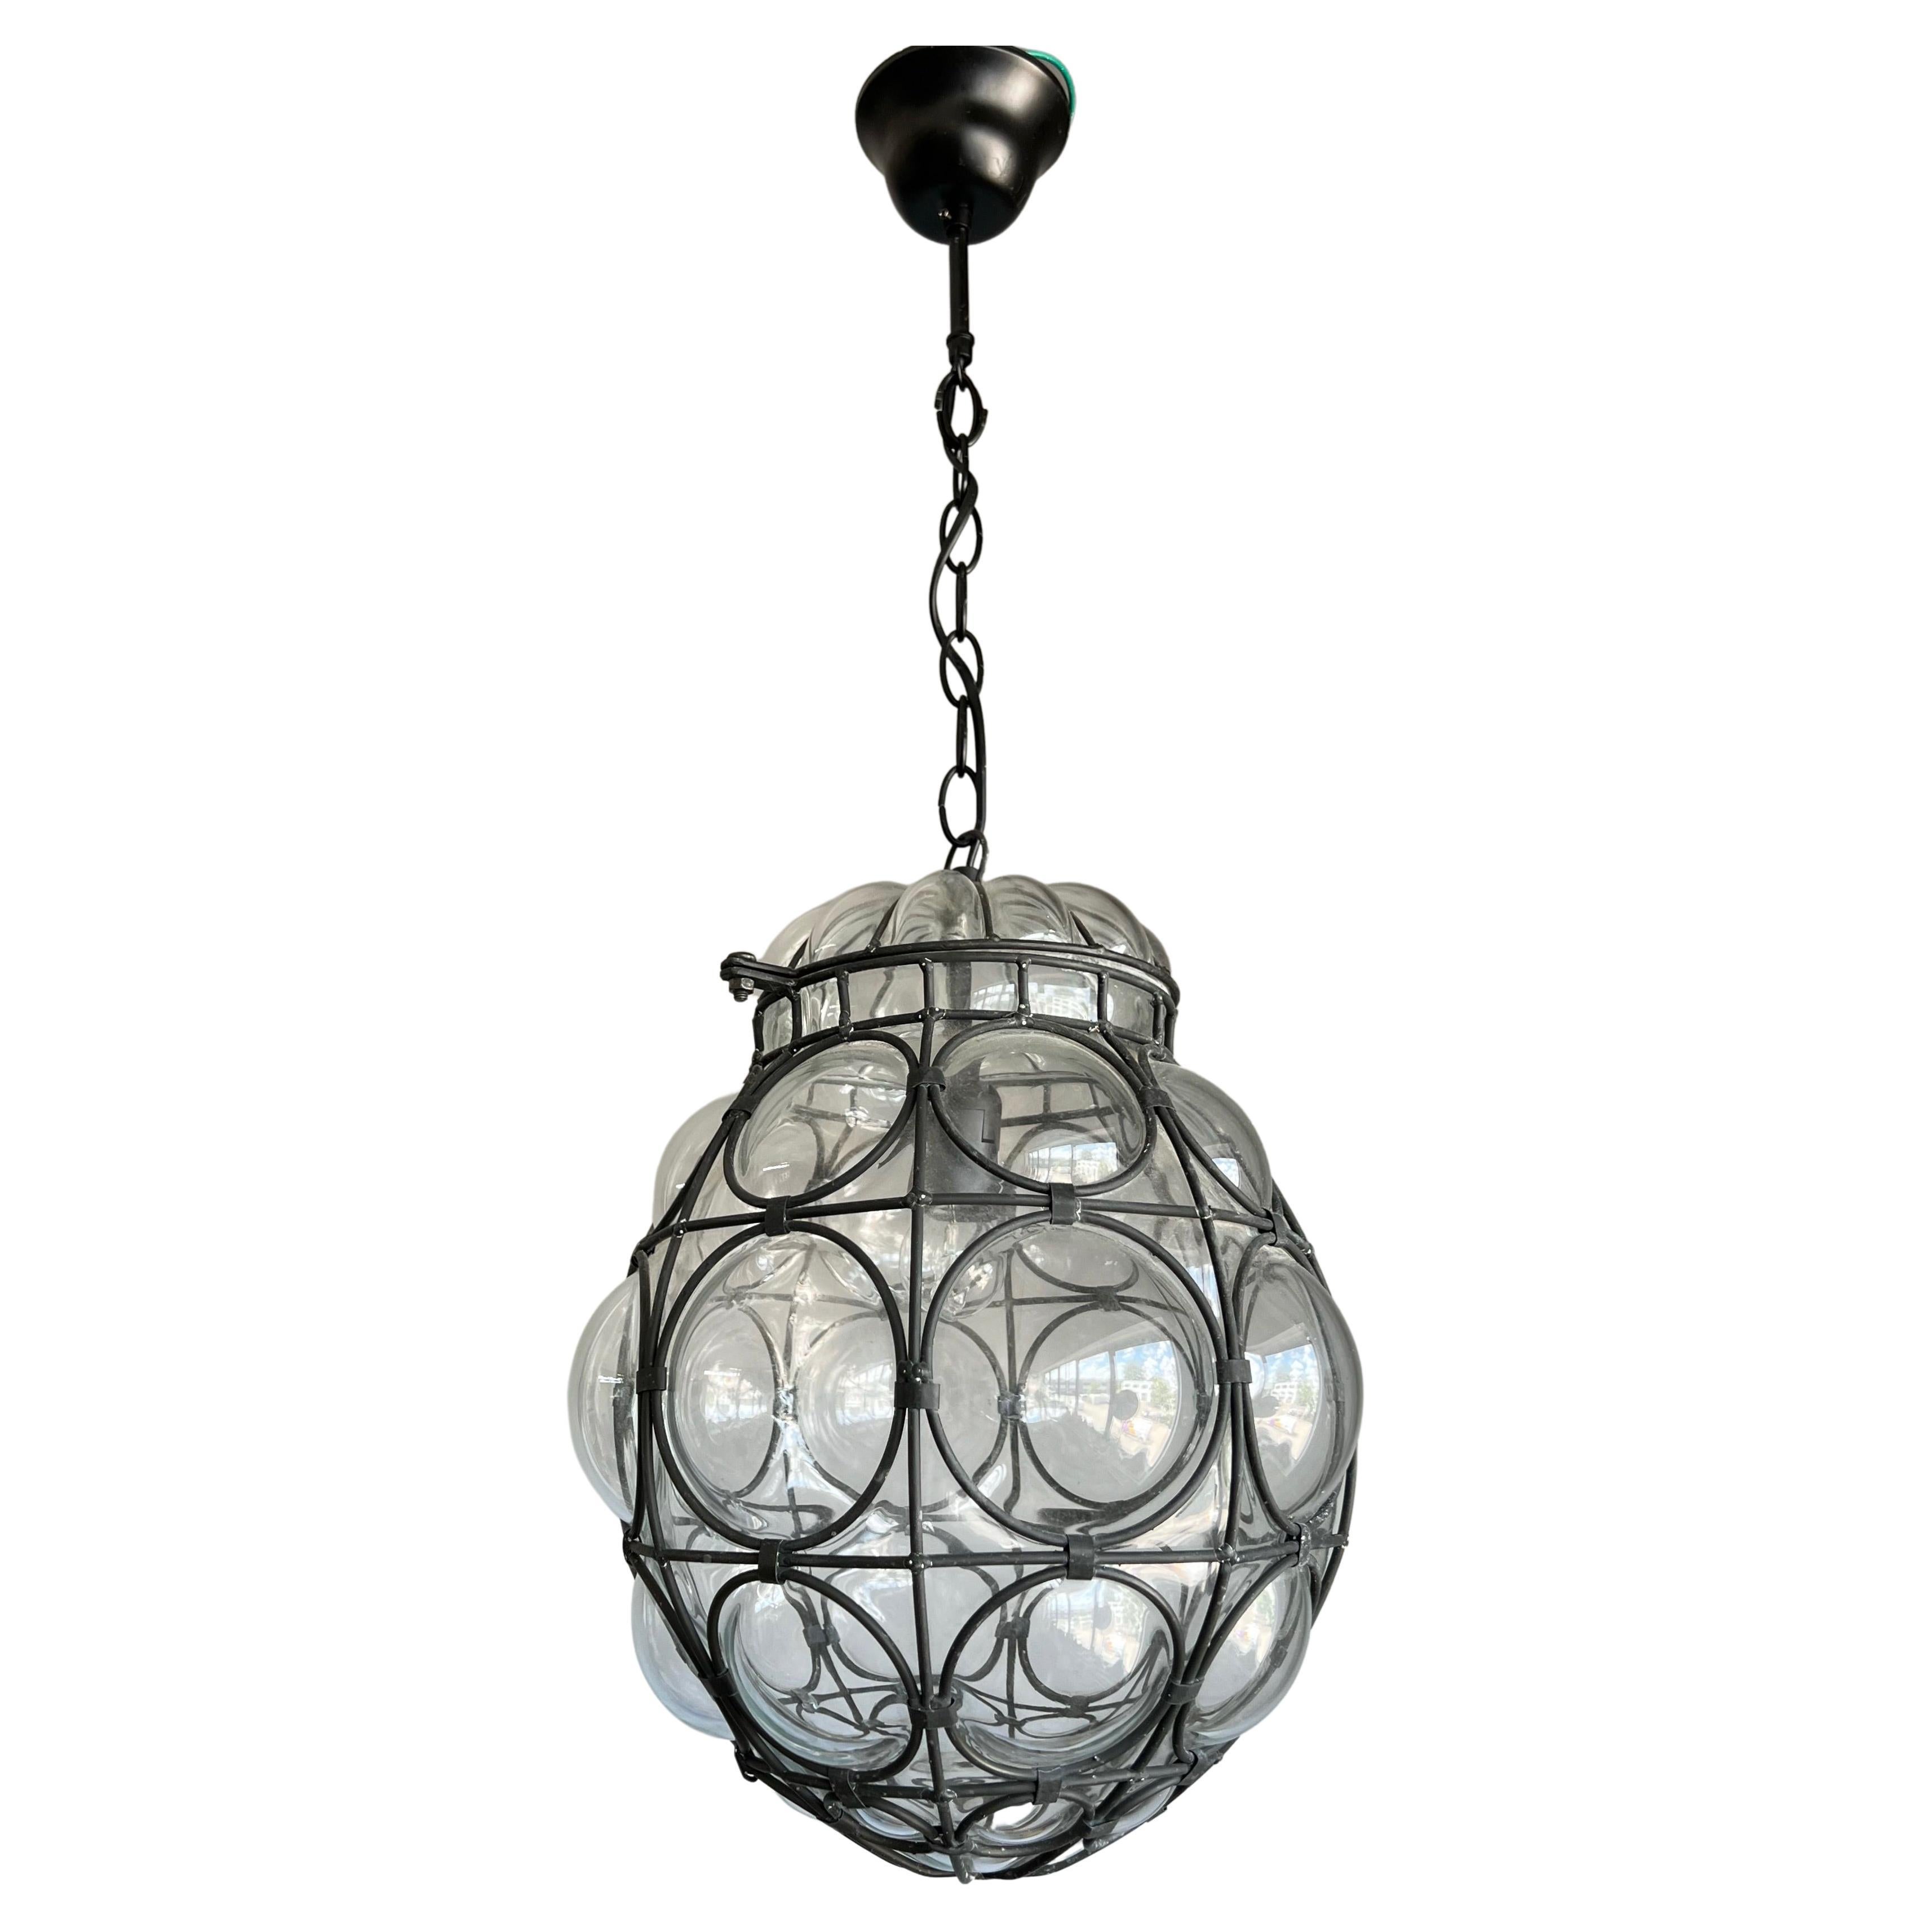 Good Size Venetian Mouth Blown Glass in Hand-Crafted Metal Frame Pendant Light